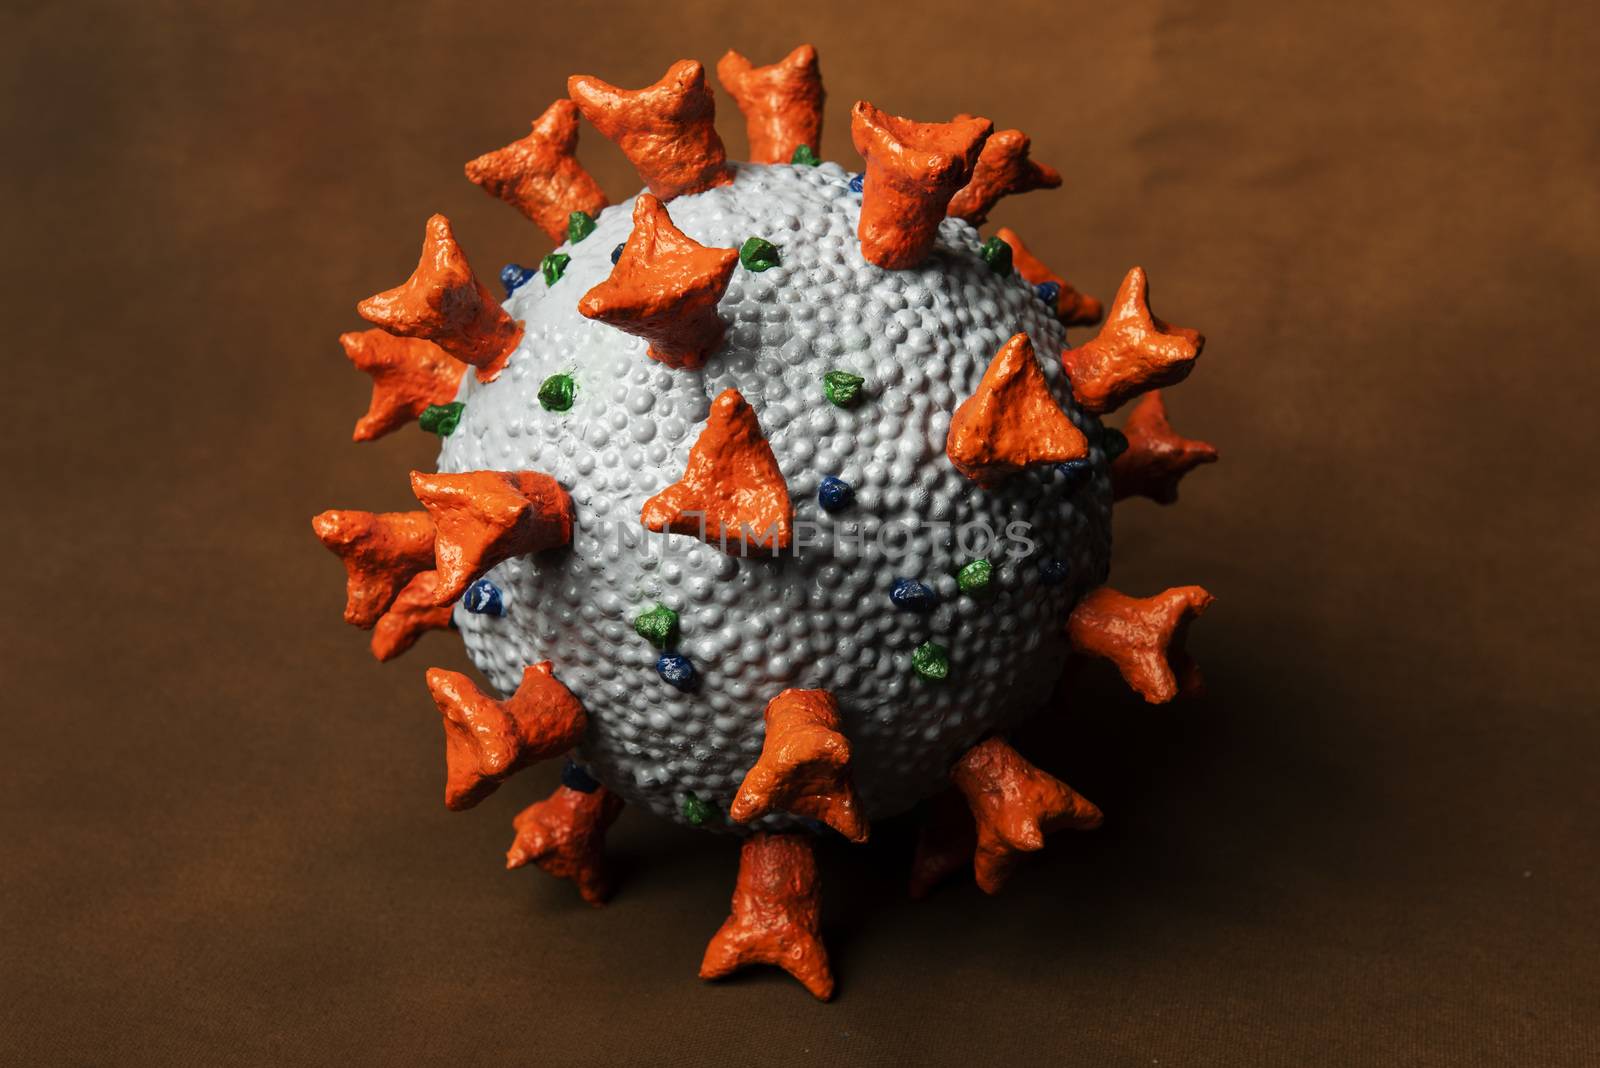 Coronavirus school model for science education on a brown backgr by fyletto